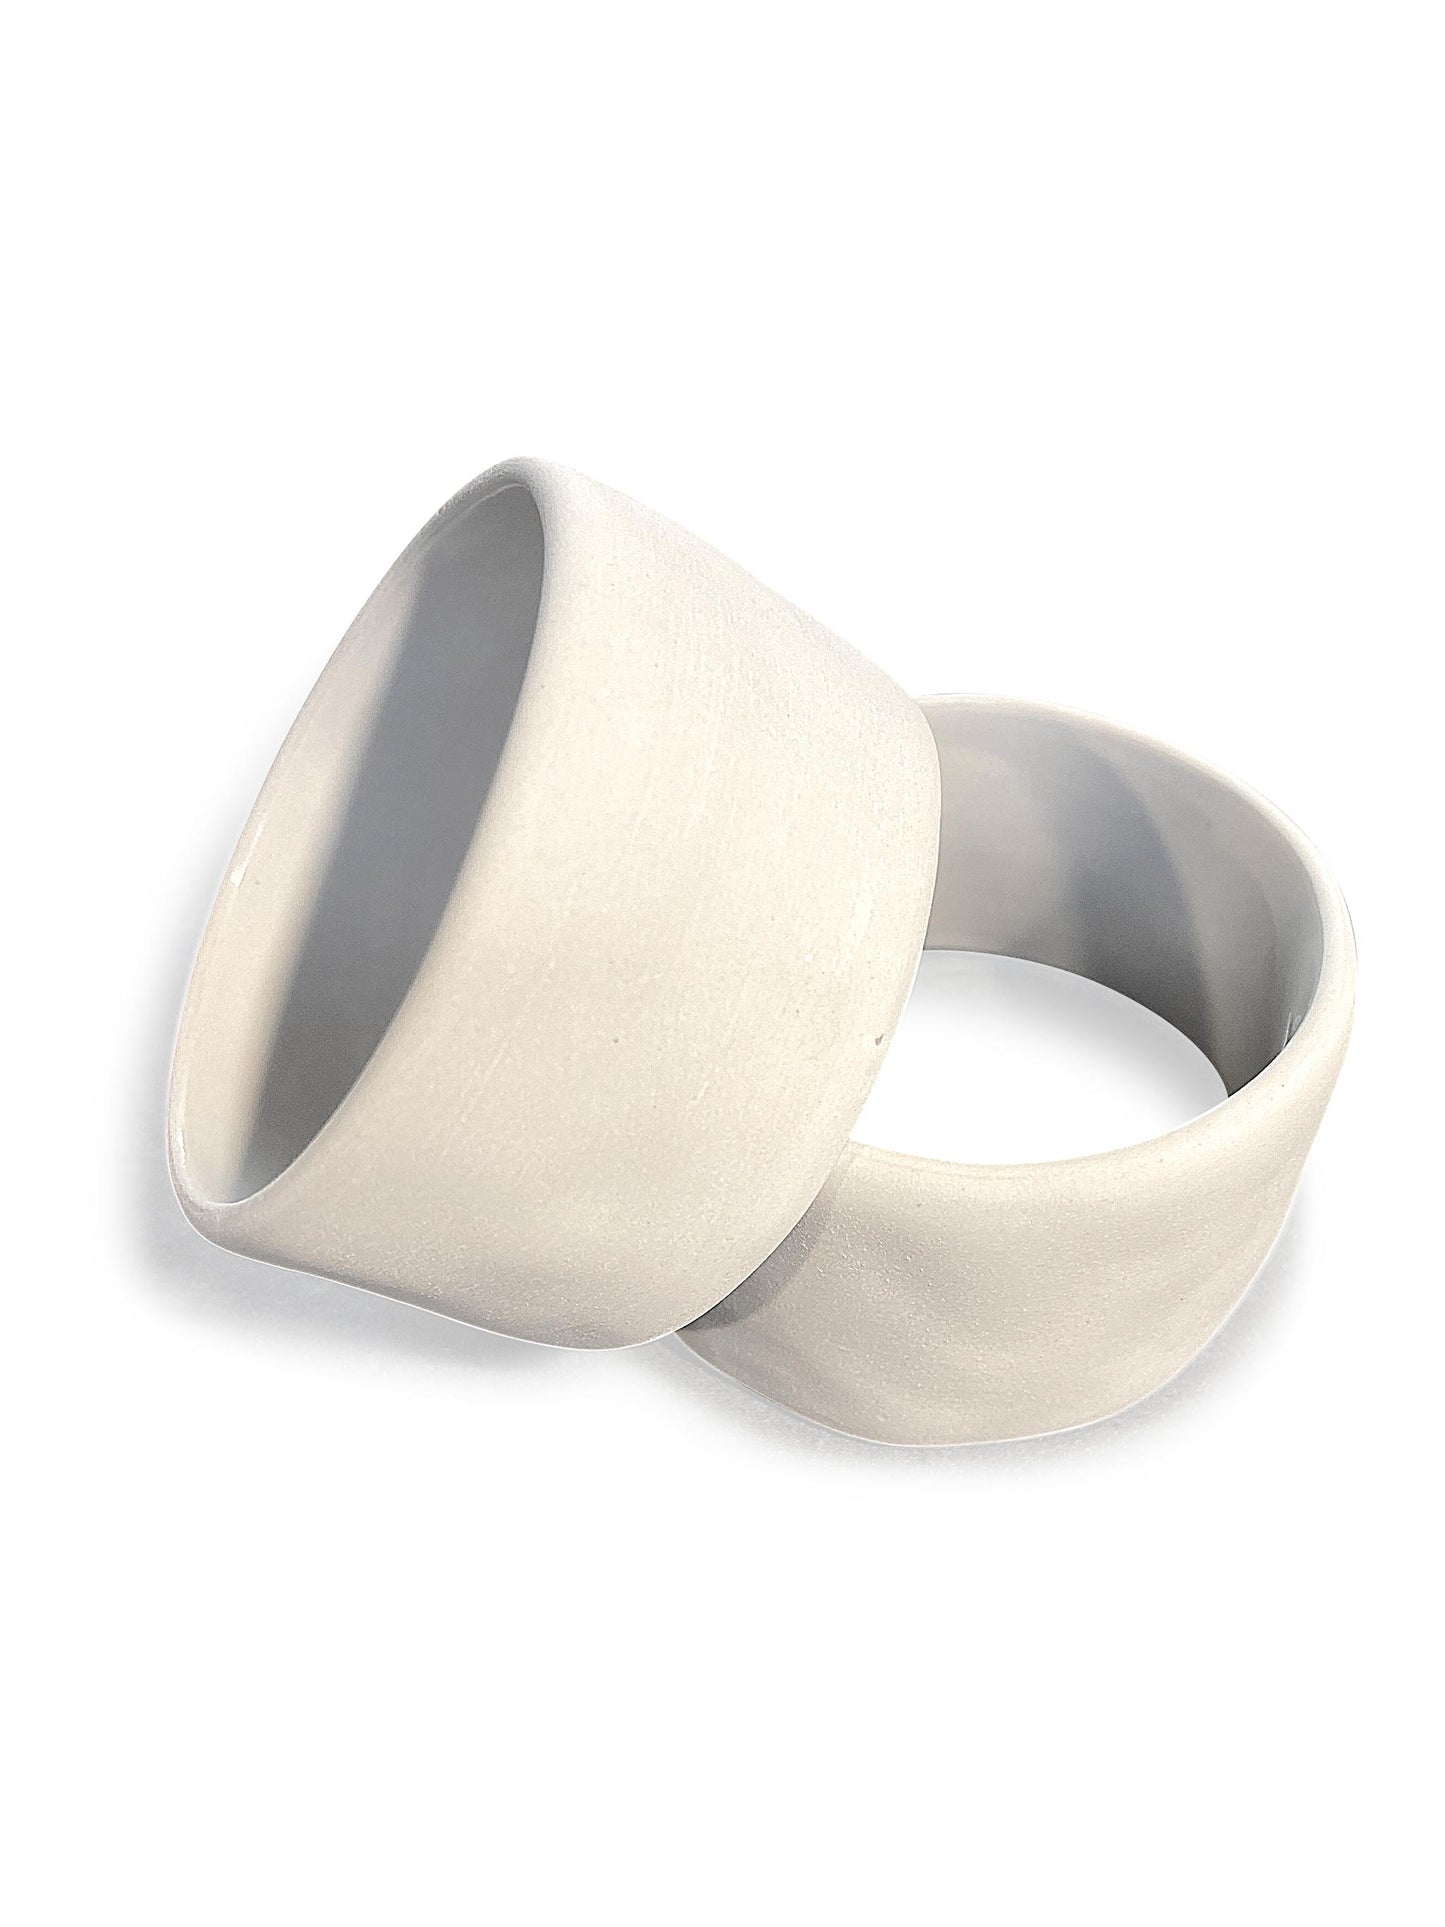 Flax Handcrafted Napkin Ring in Textured Ceramic Snow White 5.5cm